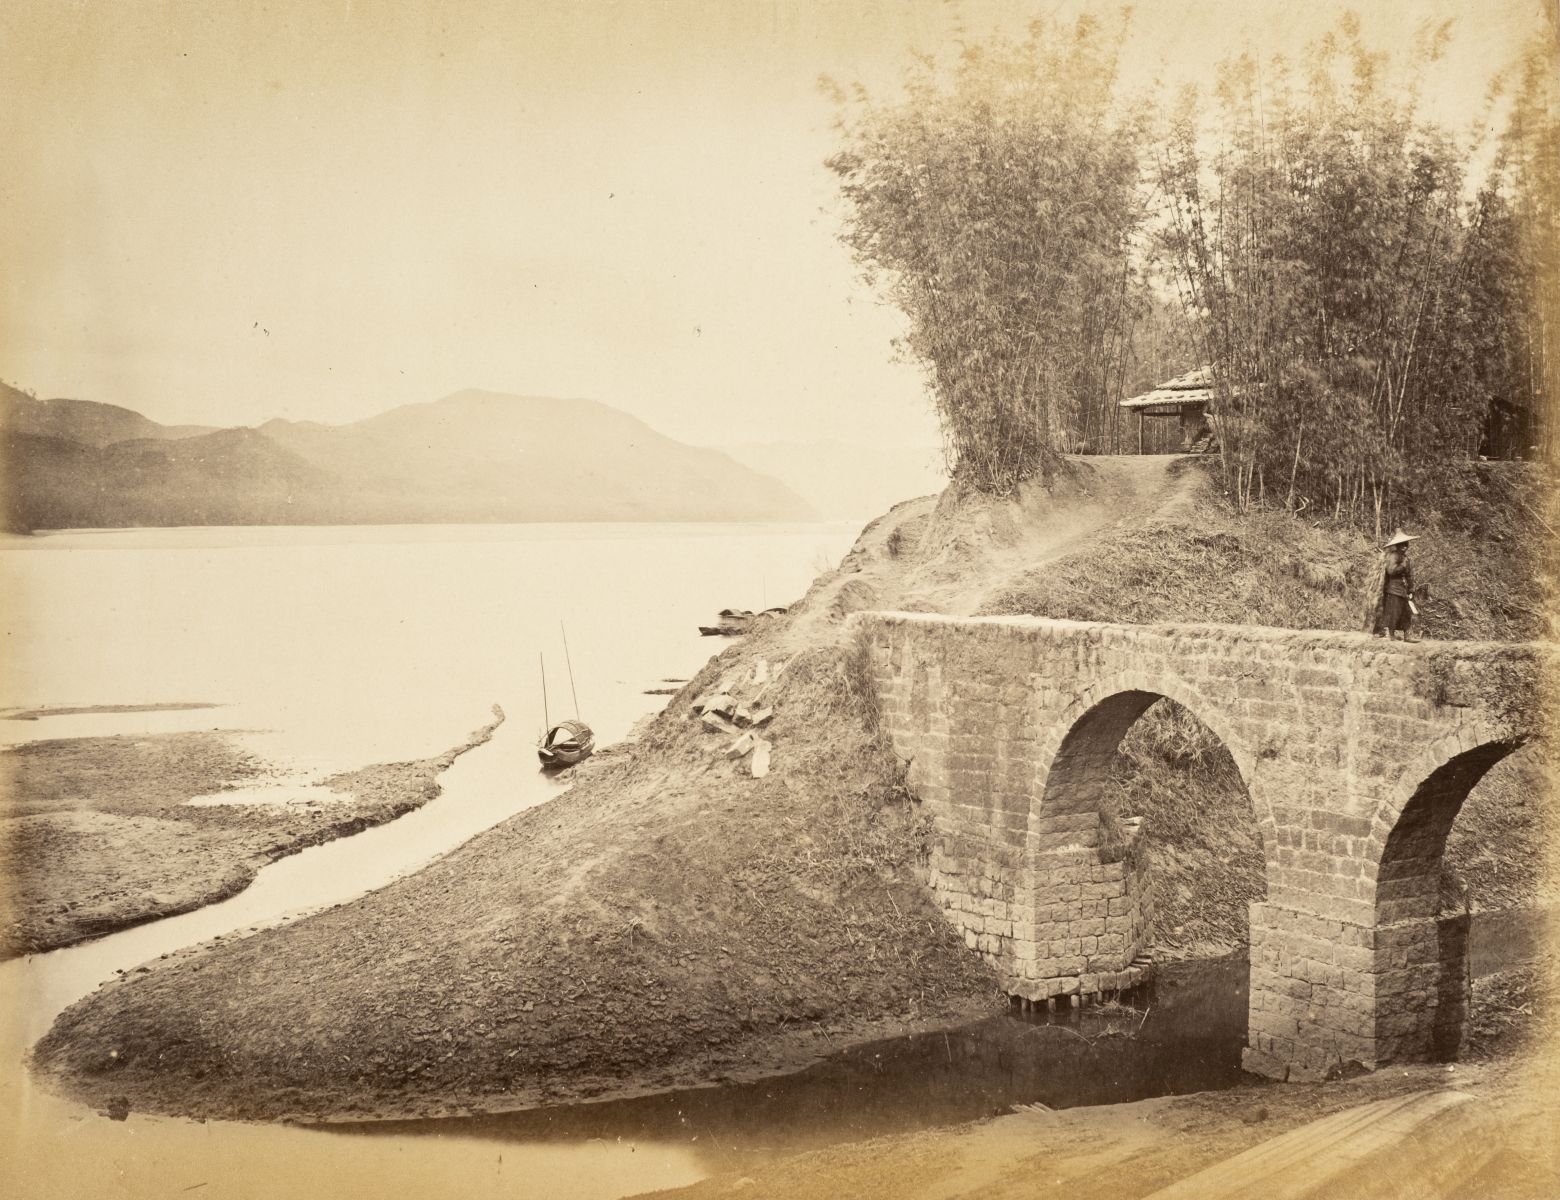 Photographs that appear in John Thomson’s photobook Views on the North River